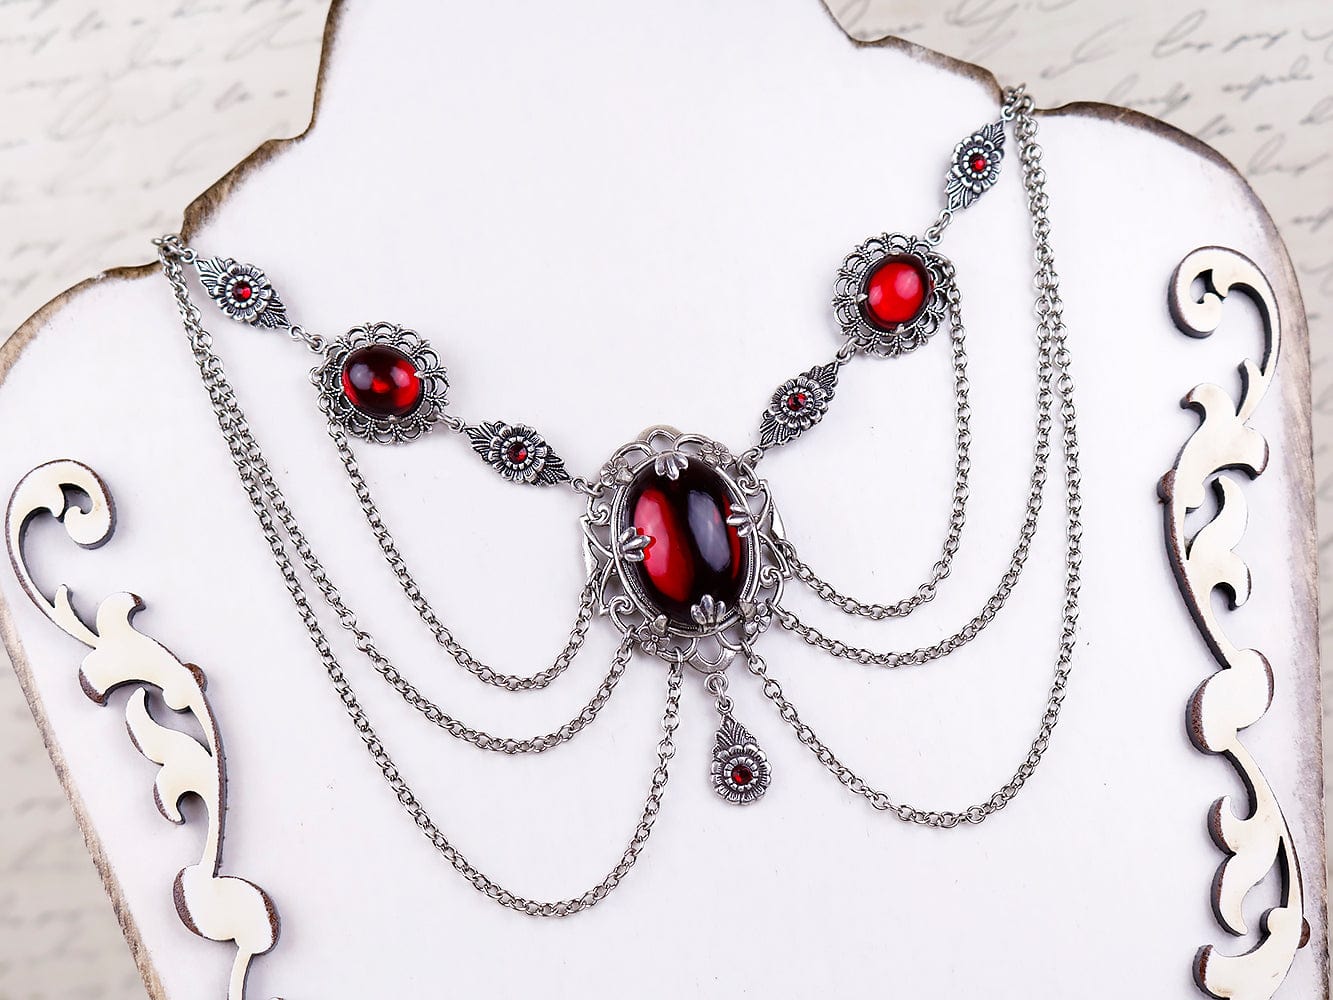 Drucilla Necklace in Garnet and Antiqued Silver by Rabbitwood and Reason